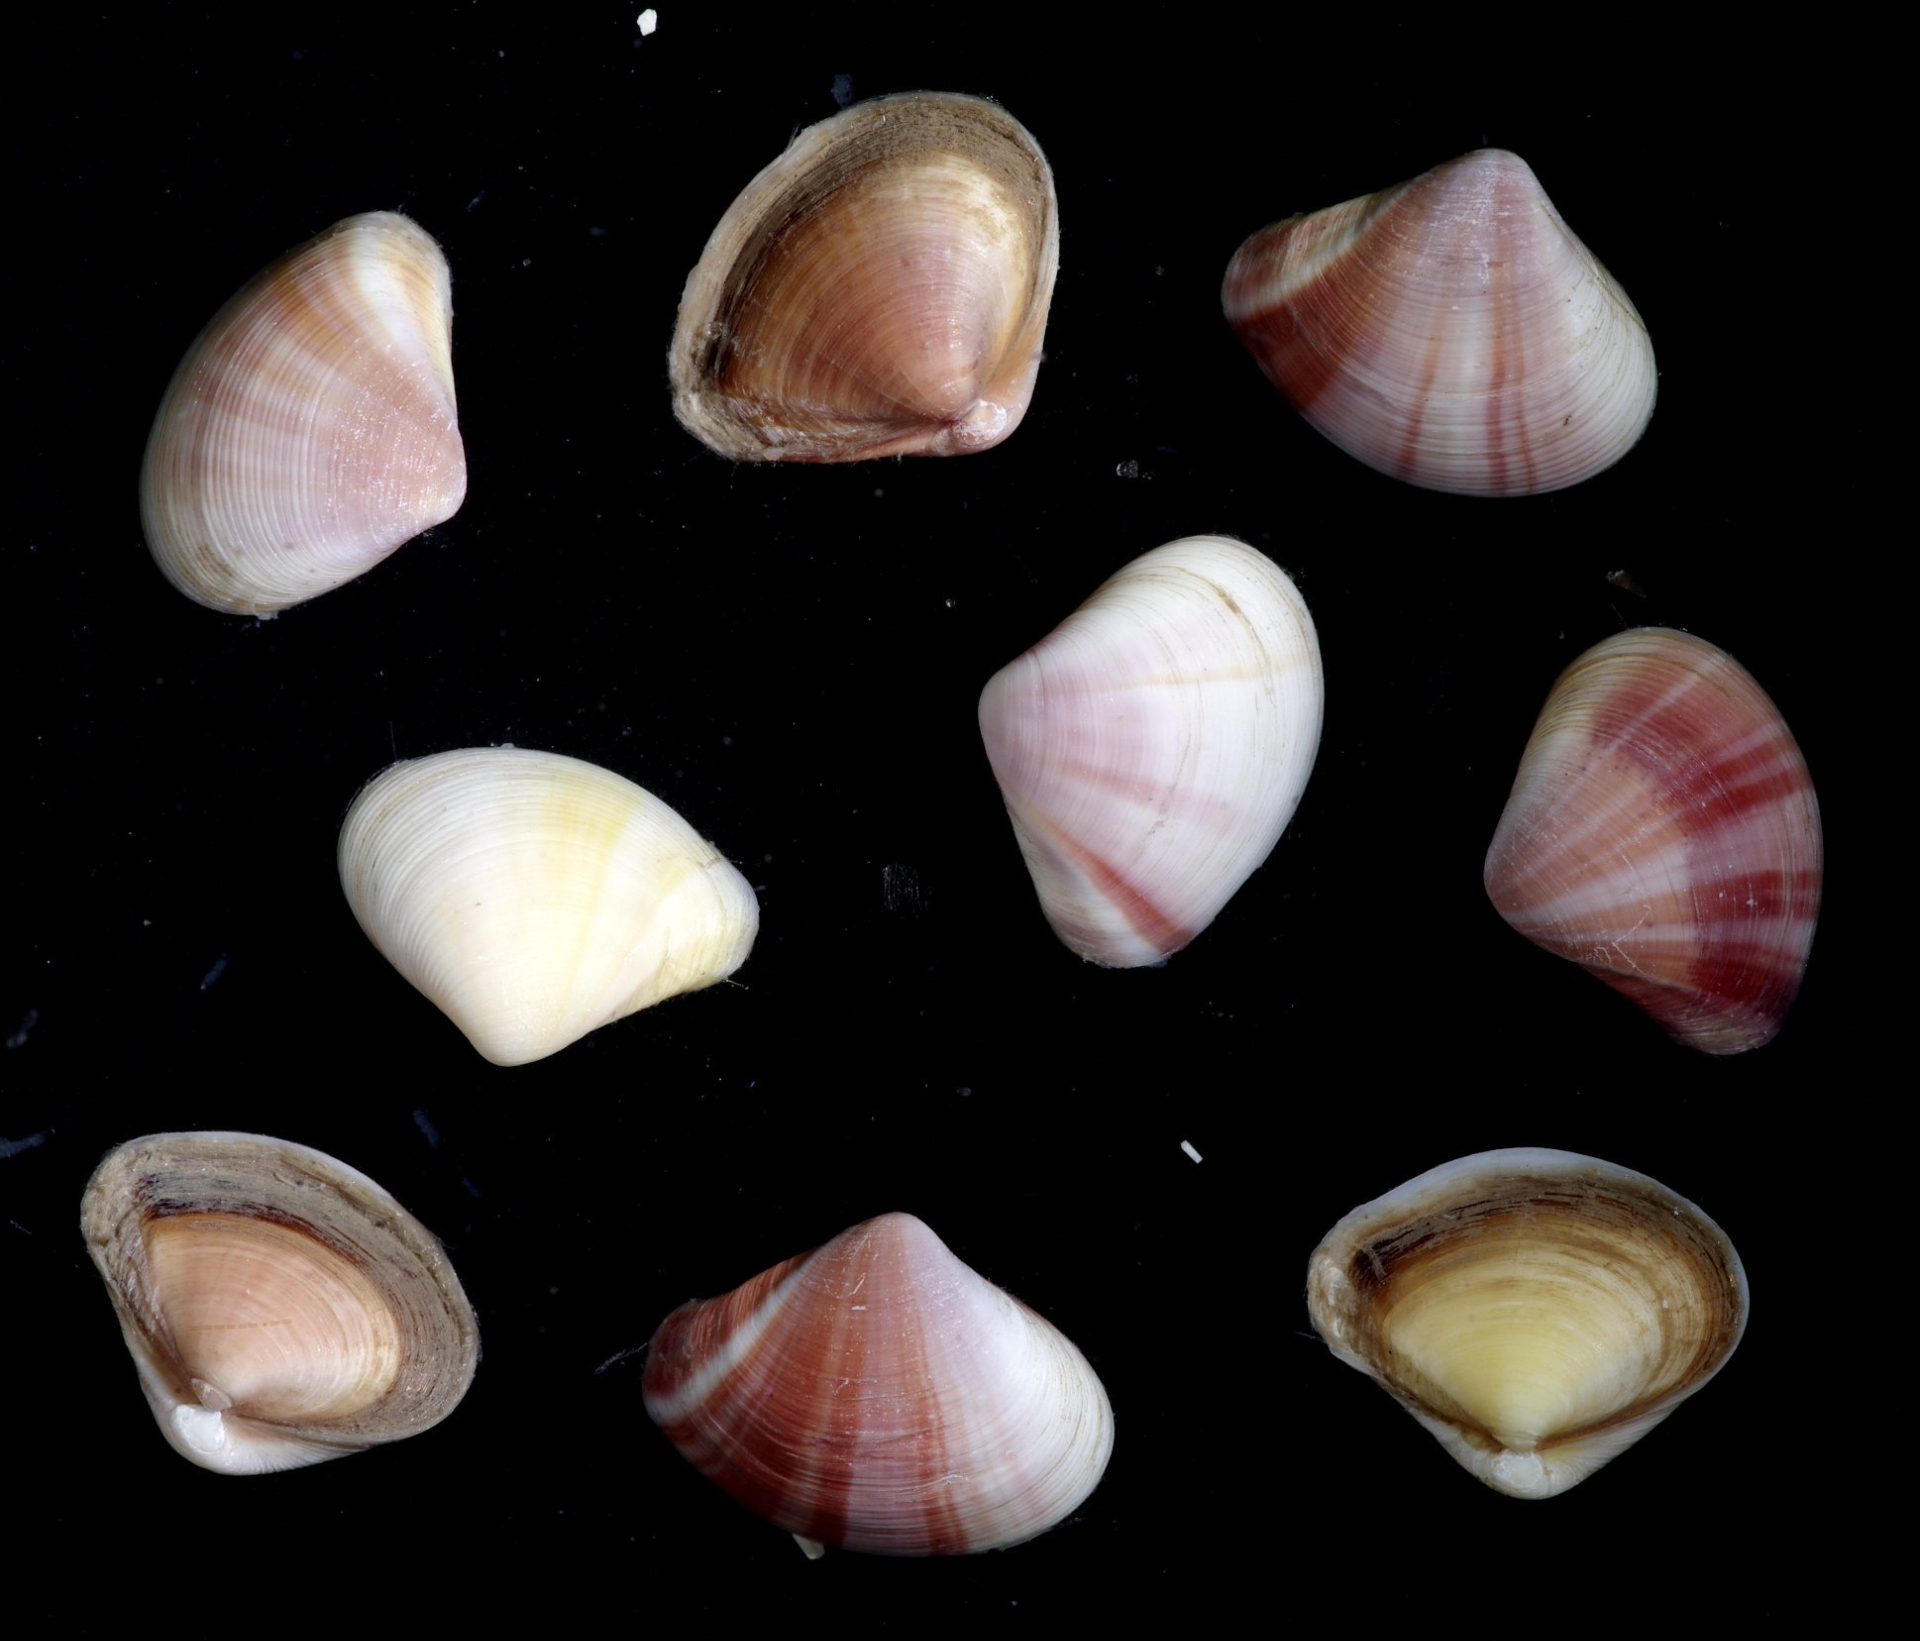 These colourful shells belong to Corbula gibba, a bivalve species that can occur at densities of more than 1000/m2. Photo: Lodewijk van Walraven